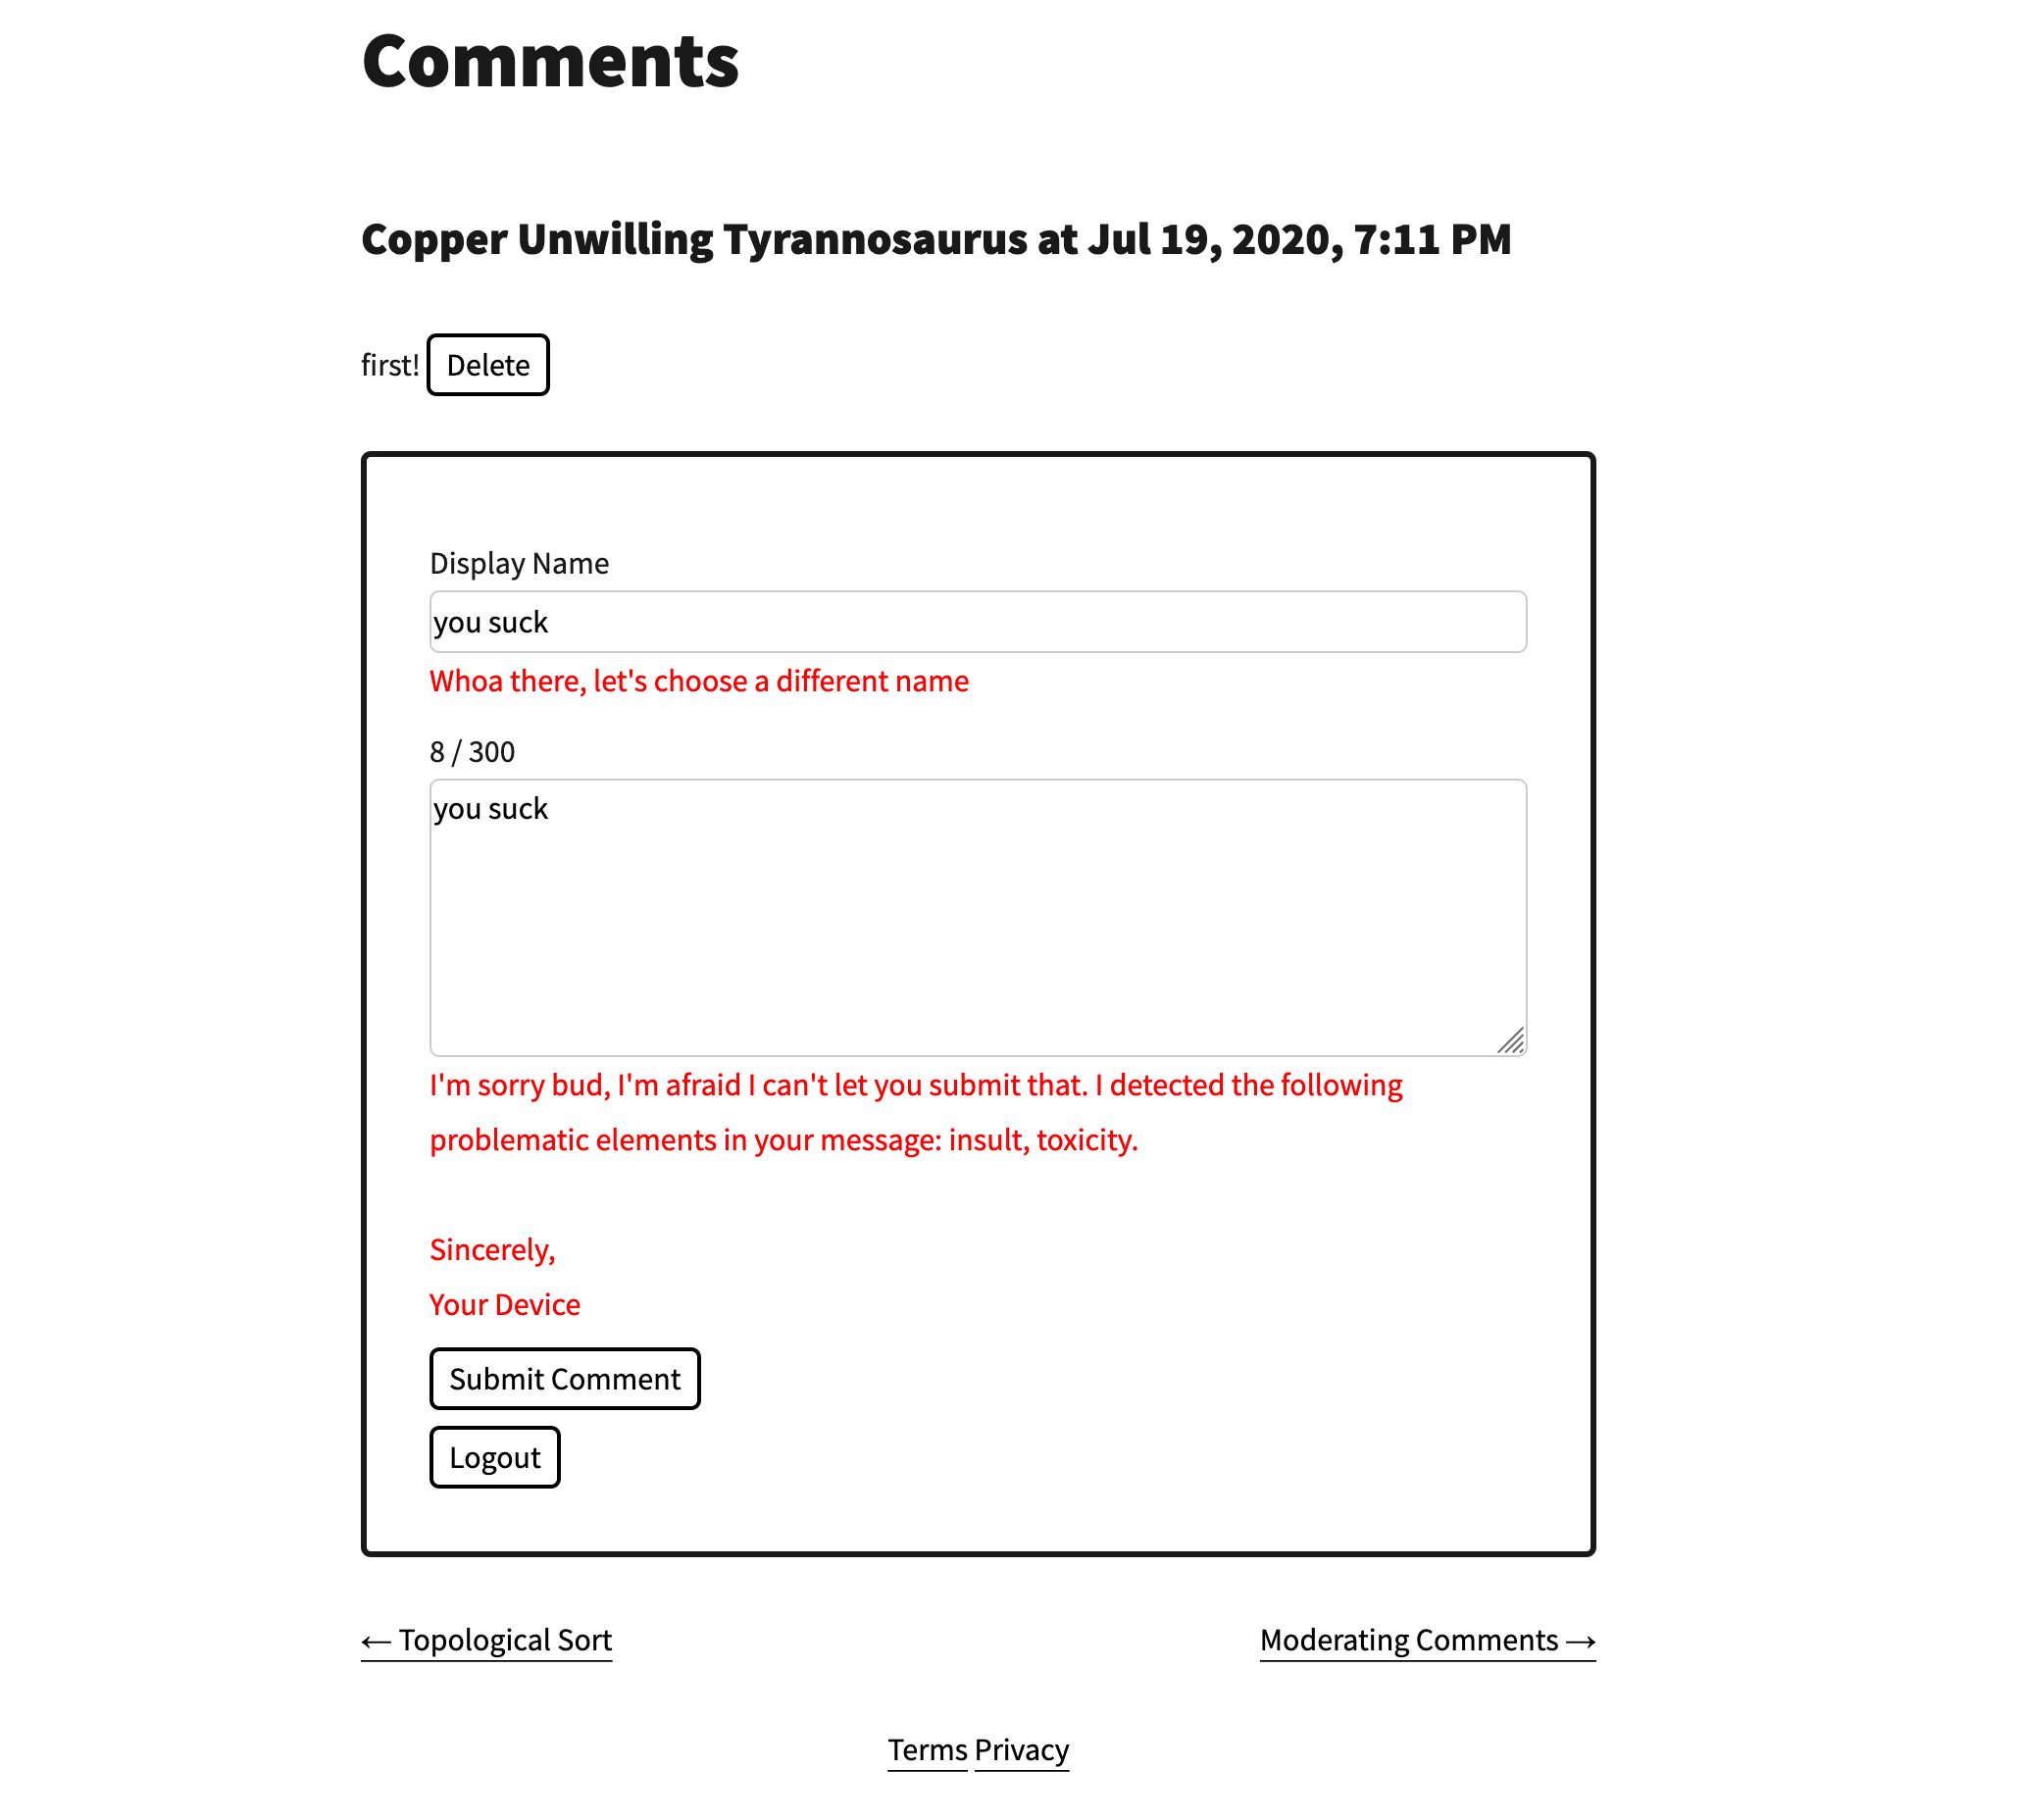 Comment composed with a toxic display name is still denied submission